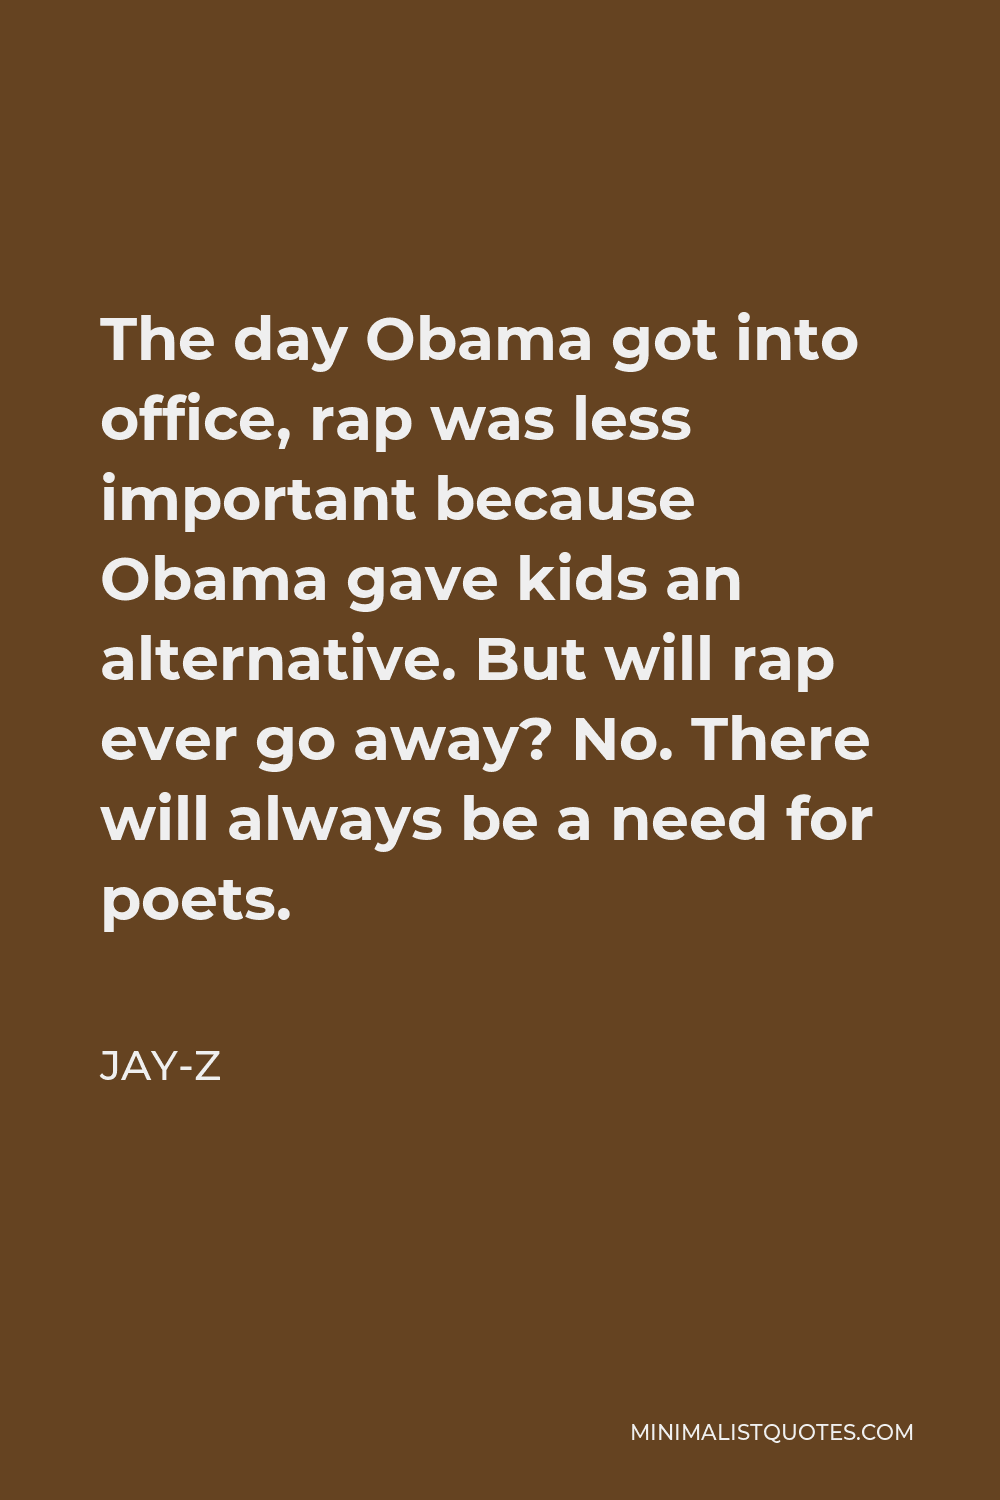 Jay-Z Quote - The day Obama got into office, rap was less important because Obama gave kids an alternative. But will rap ever go away? No. There will always be a need for poets.